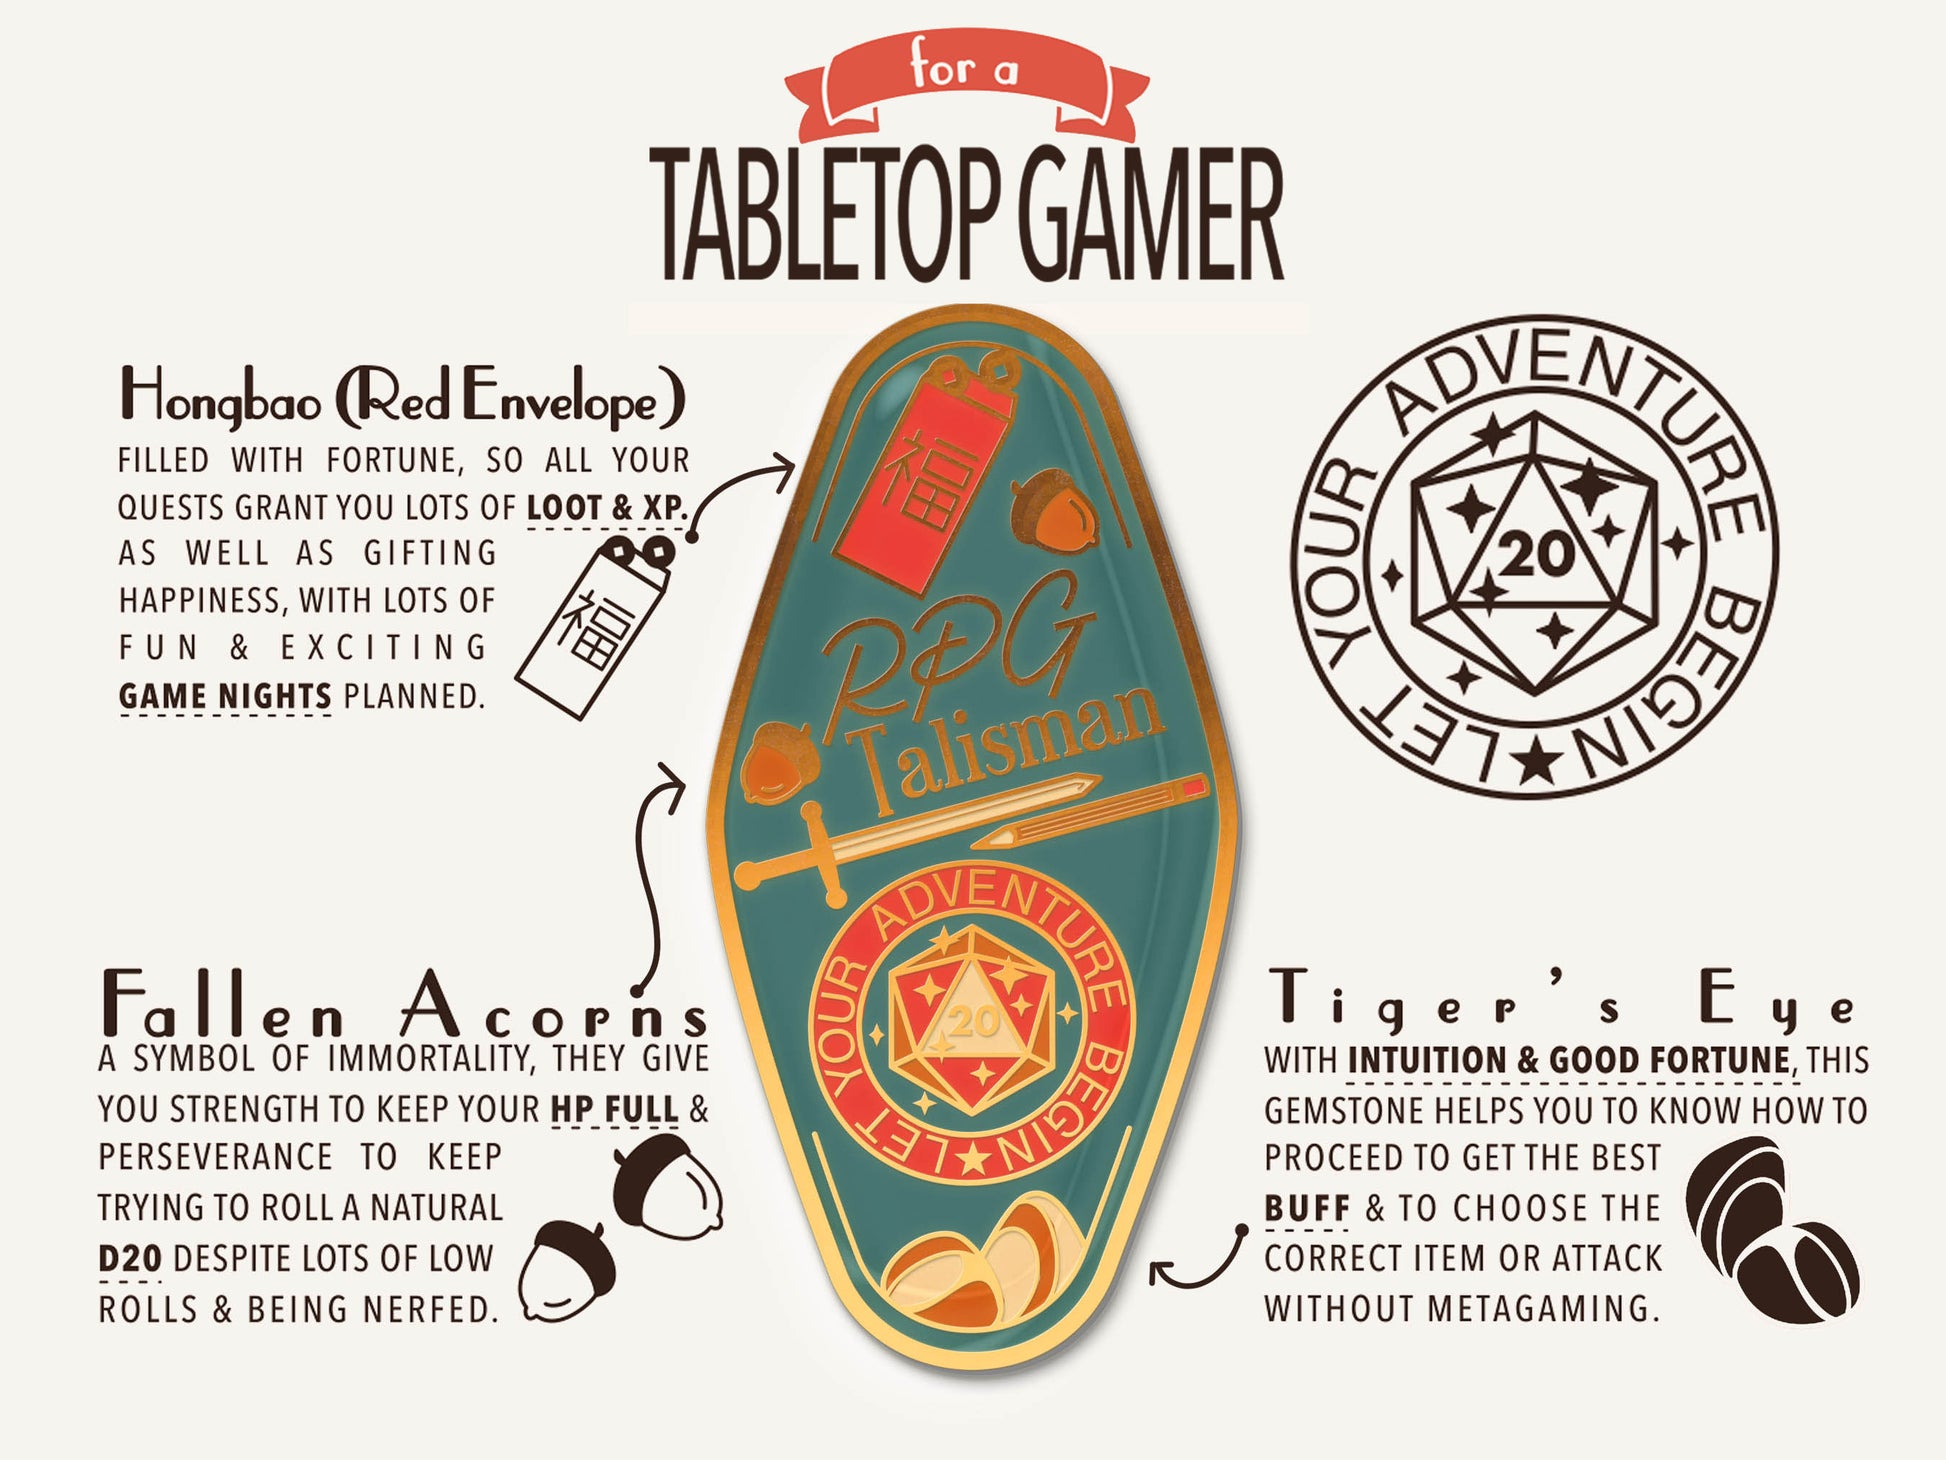 A illustrated diagram outline the symbolism of the different design elements of the for a RPG Talisman pin. Information includes the meaning of the Hongbao Red Envelope, Fallen Acorns and Tigers Eye.